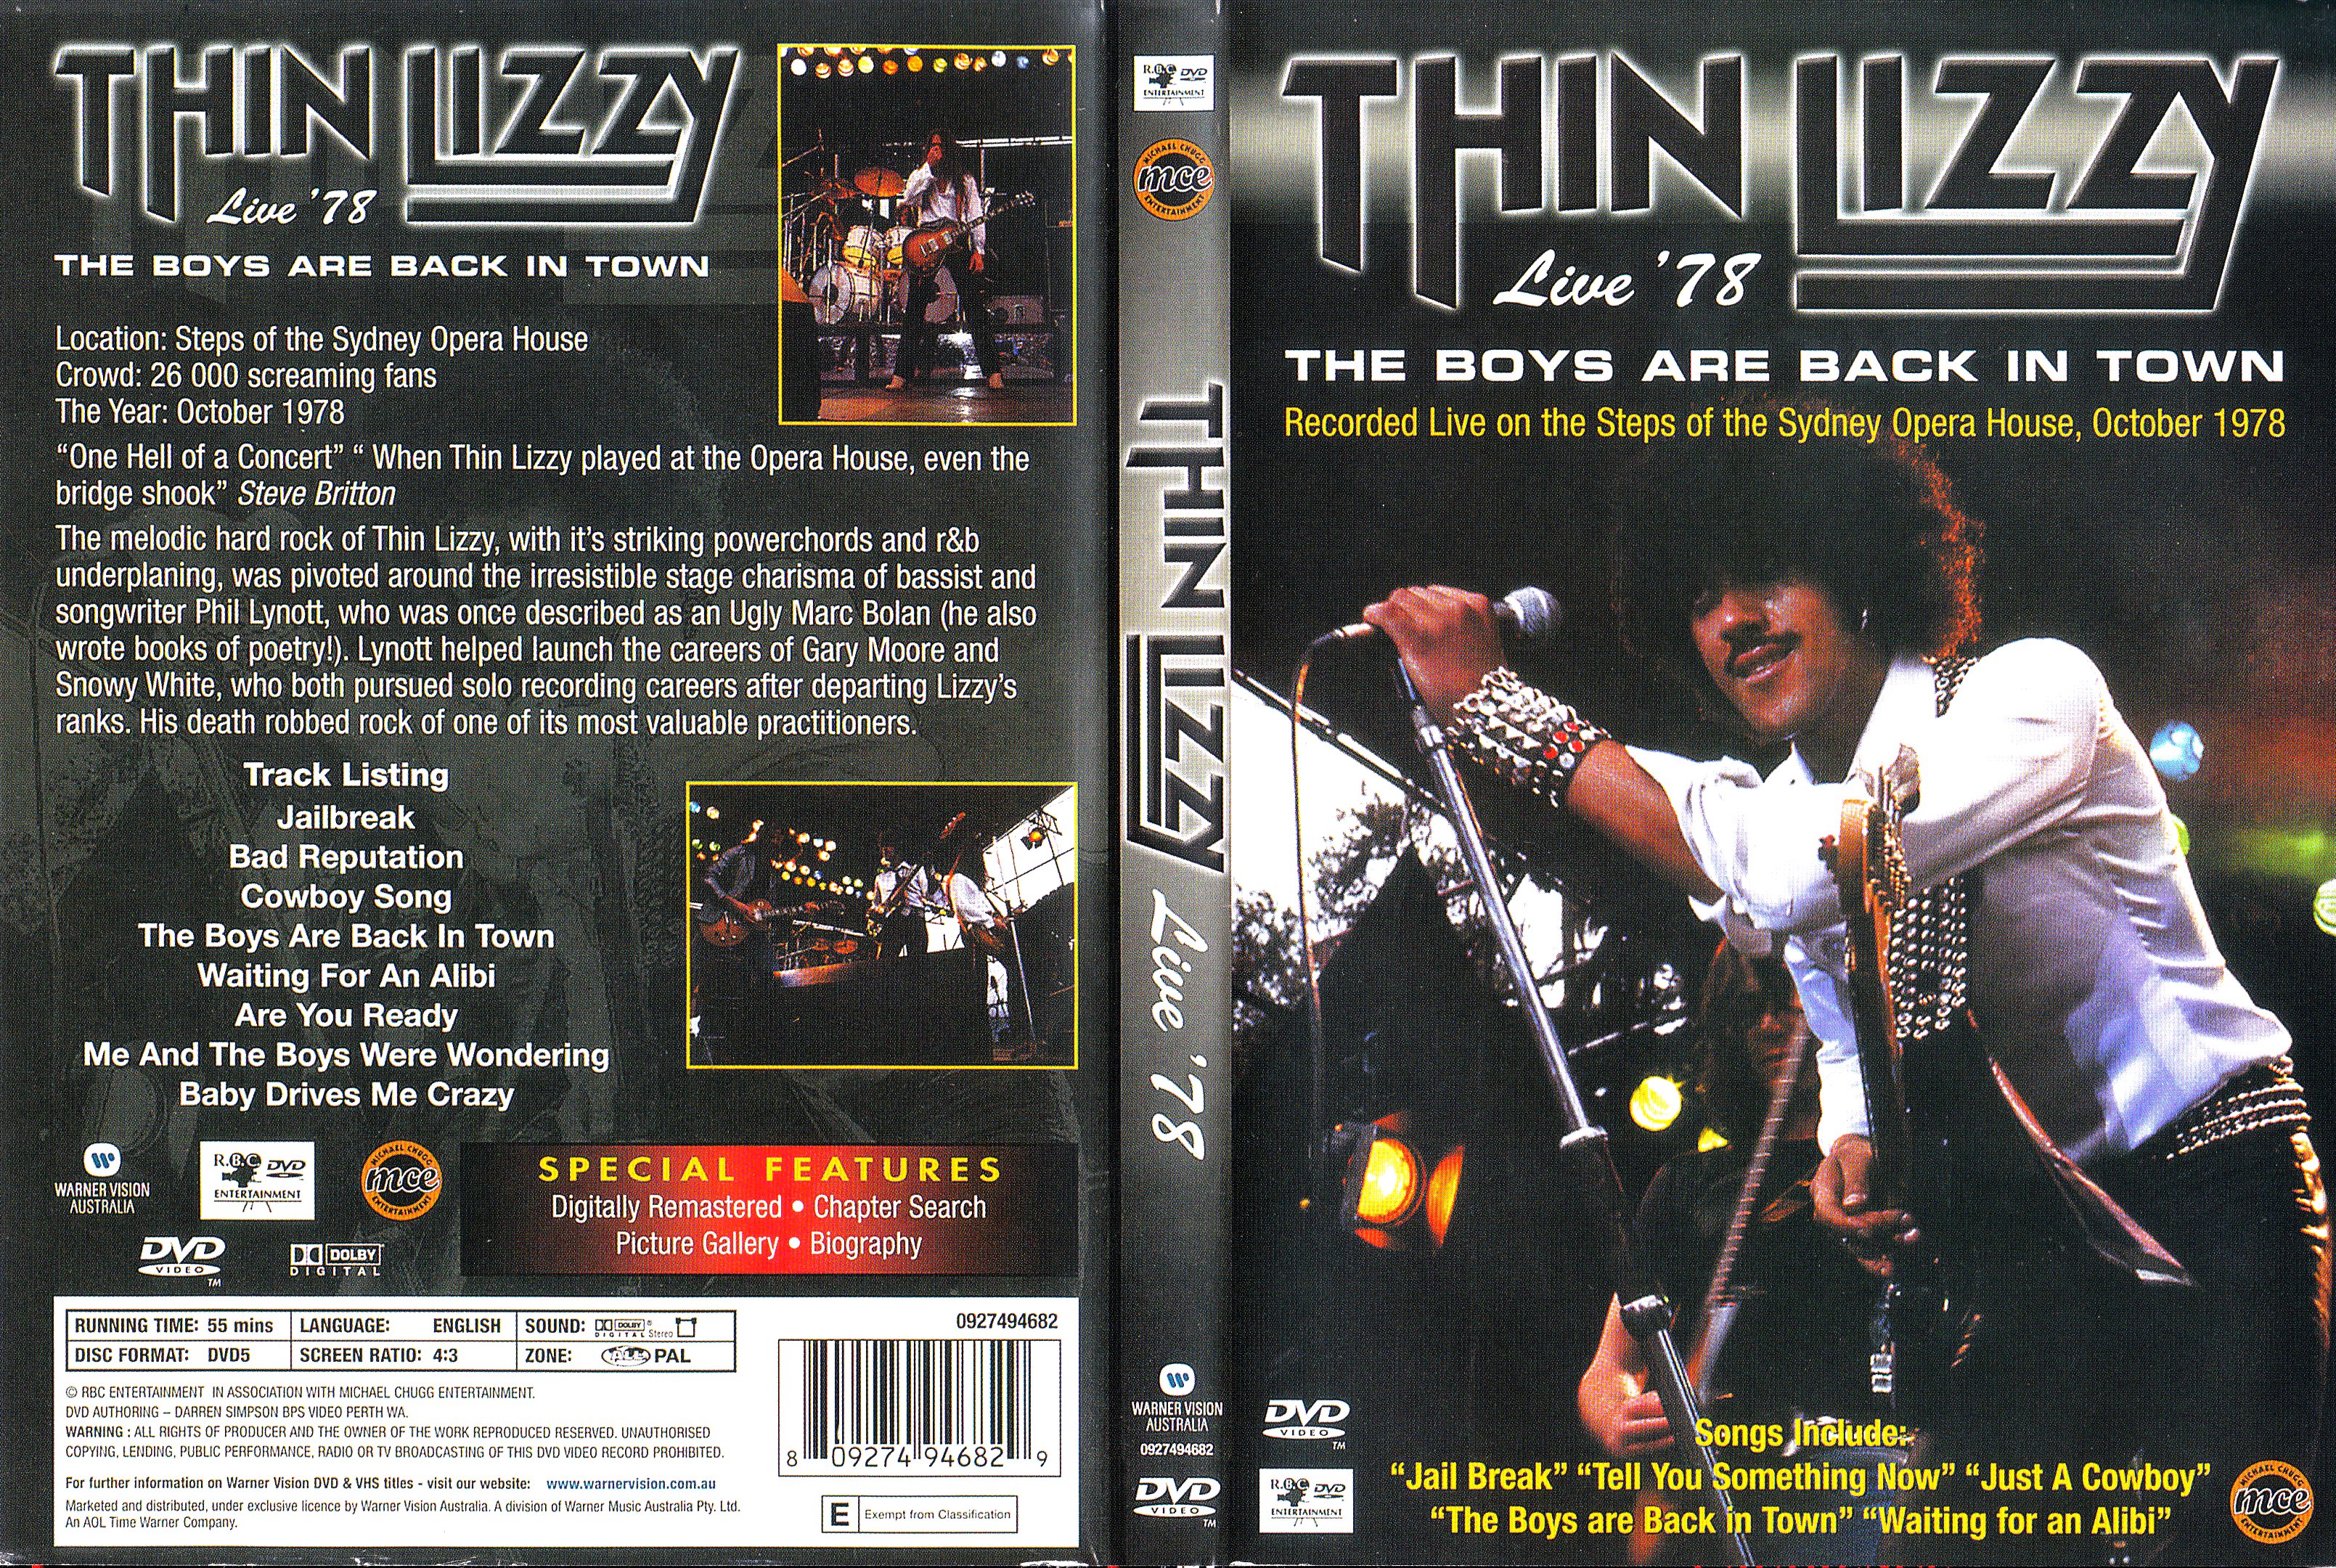 Jaquette DVD Thin Lizzy Live 78 The boys are back in town